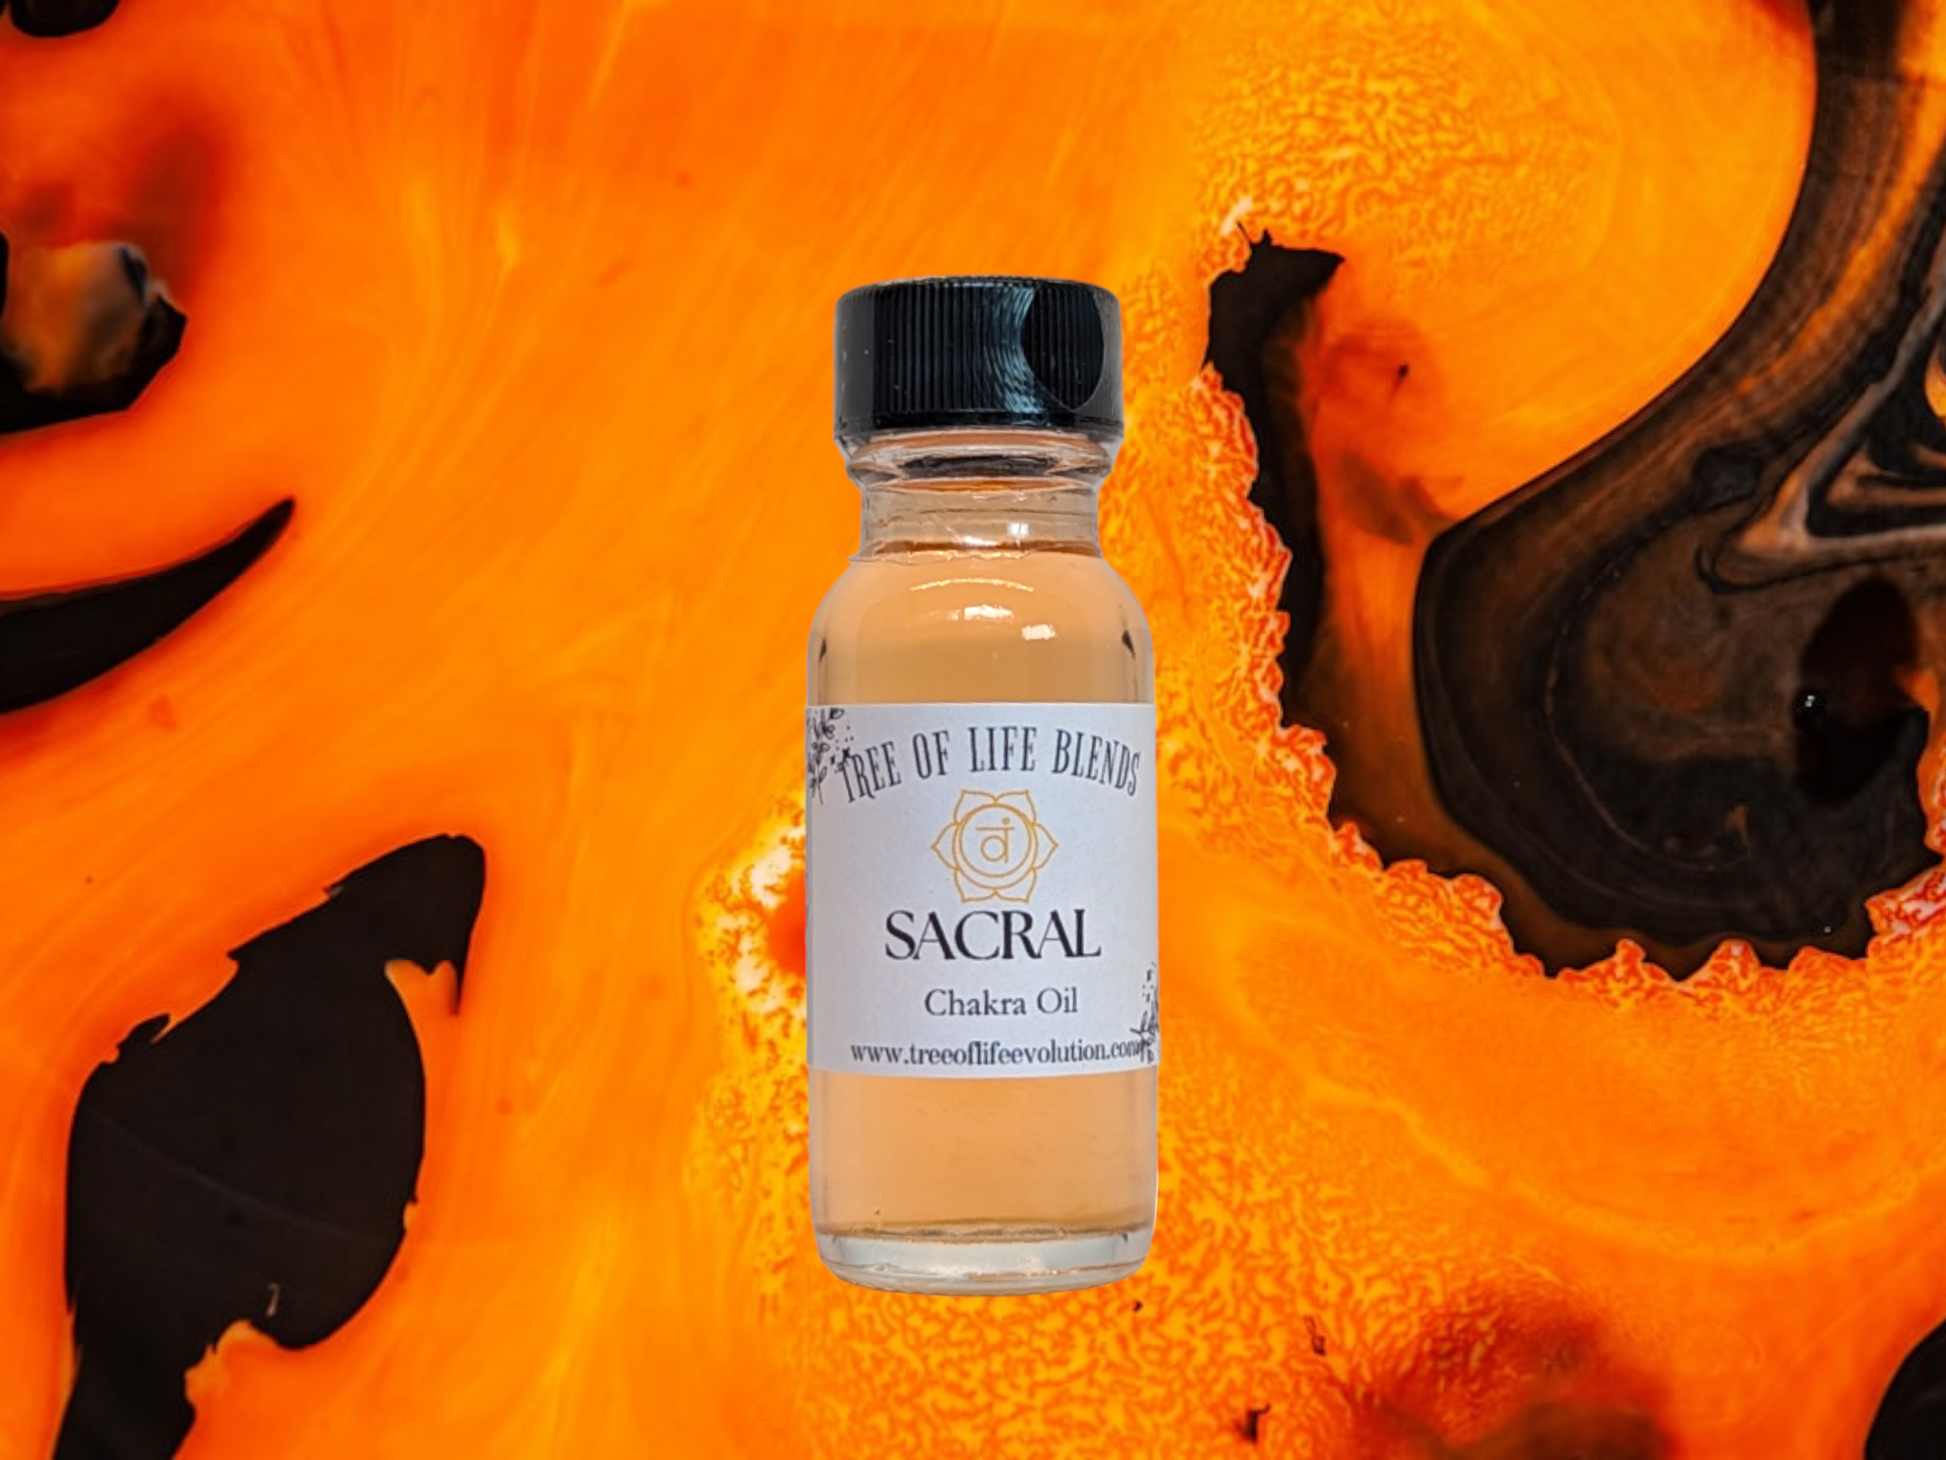 Sacral chakra oil from Tree of Life Evolution with orange swirl background